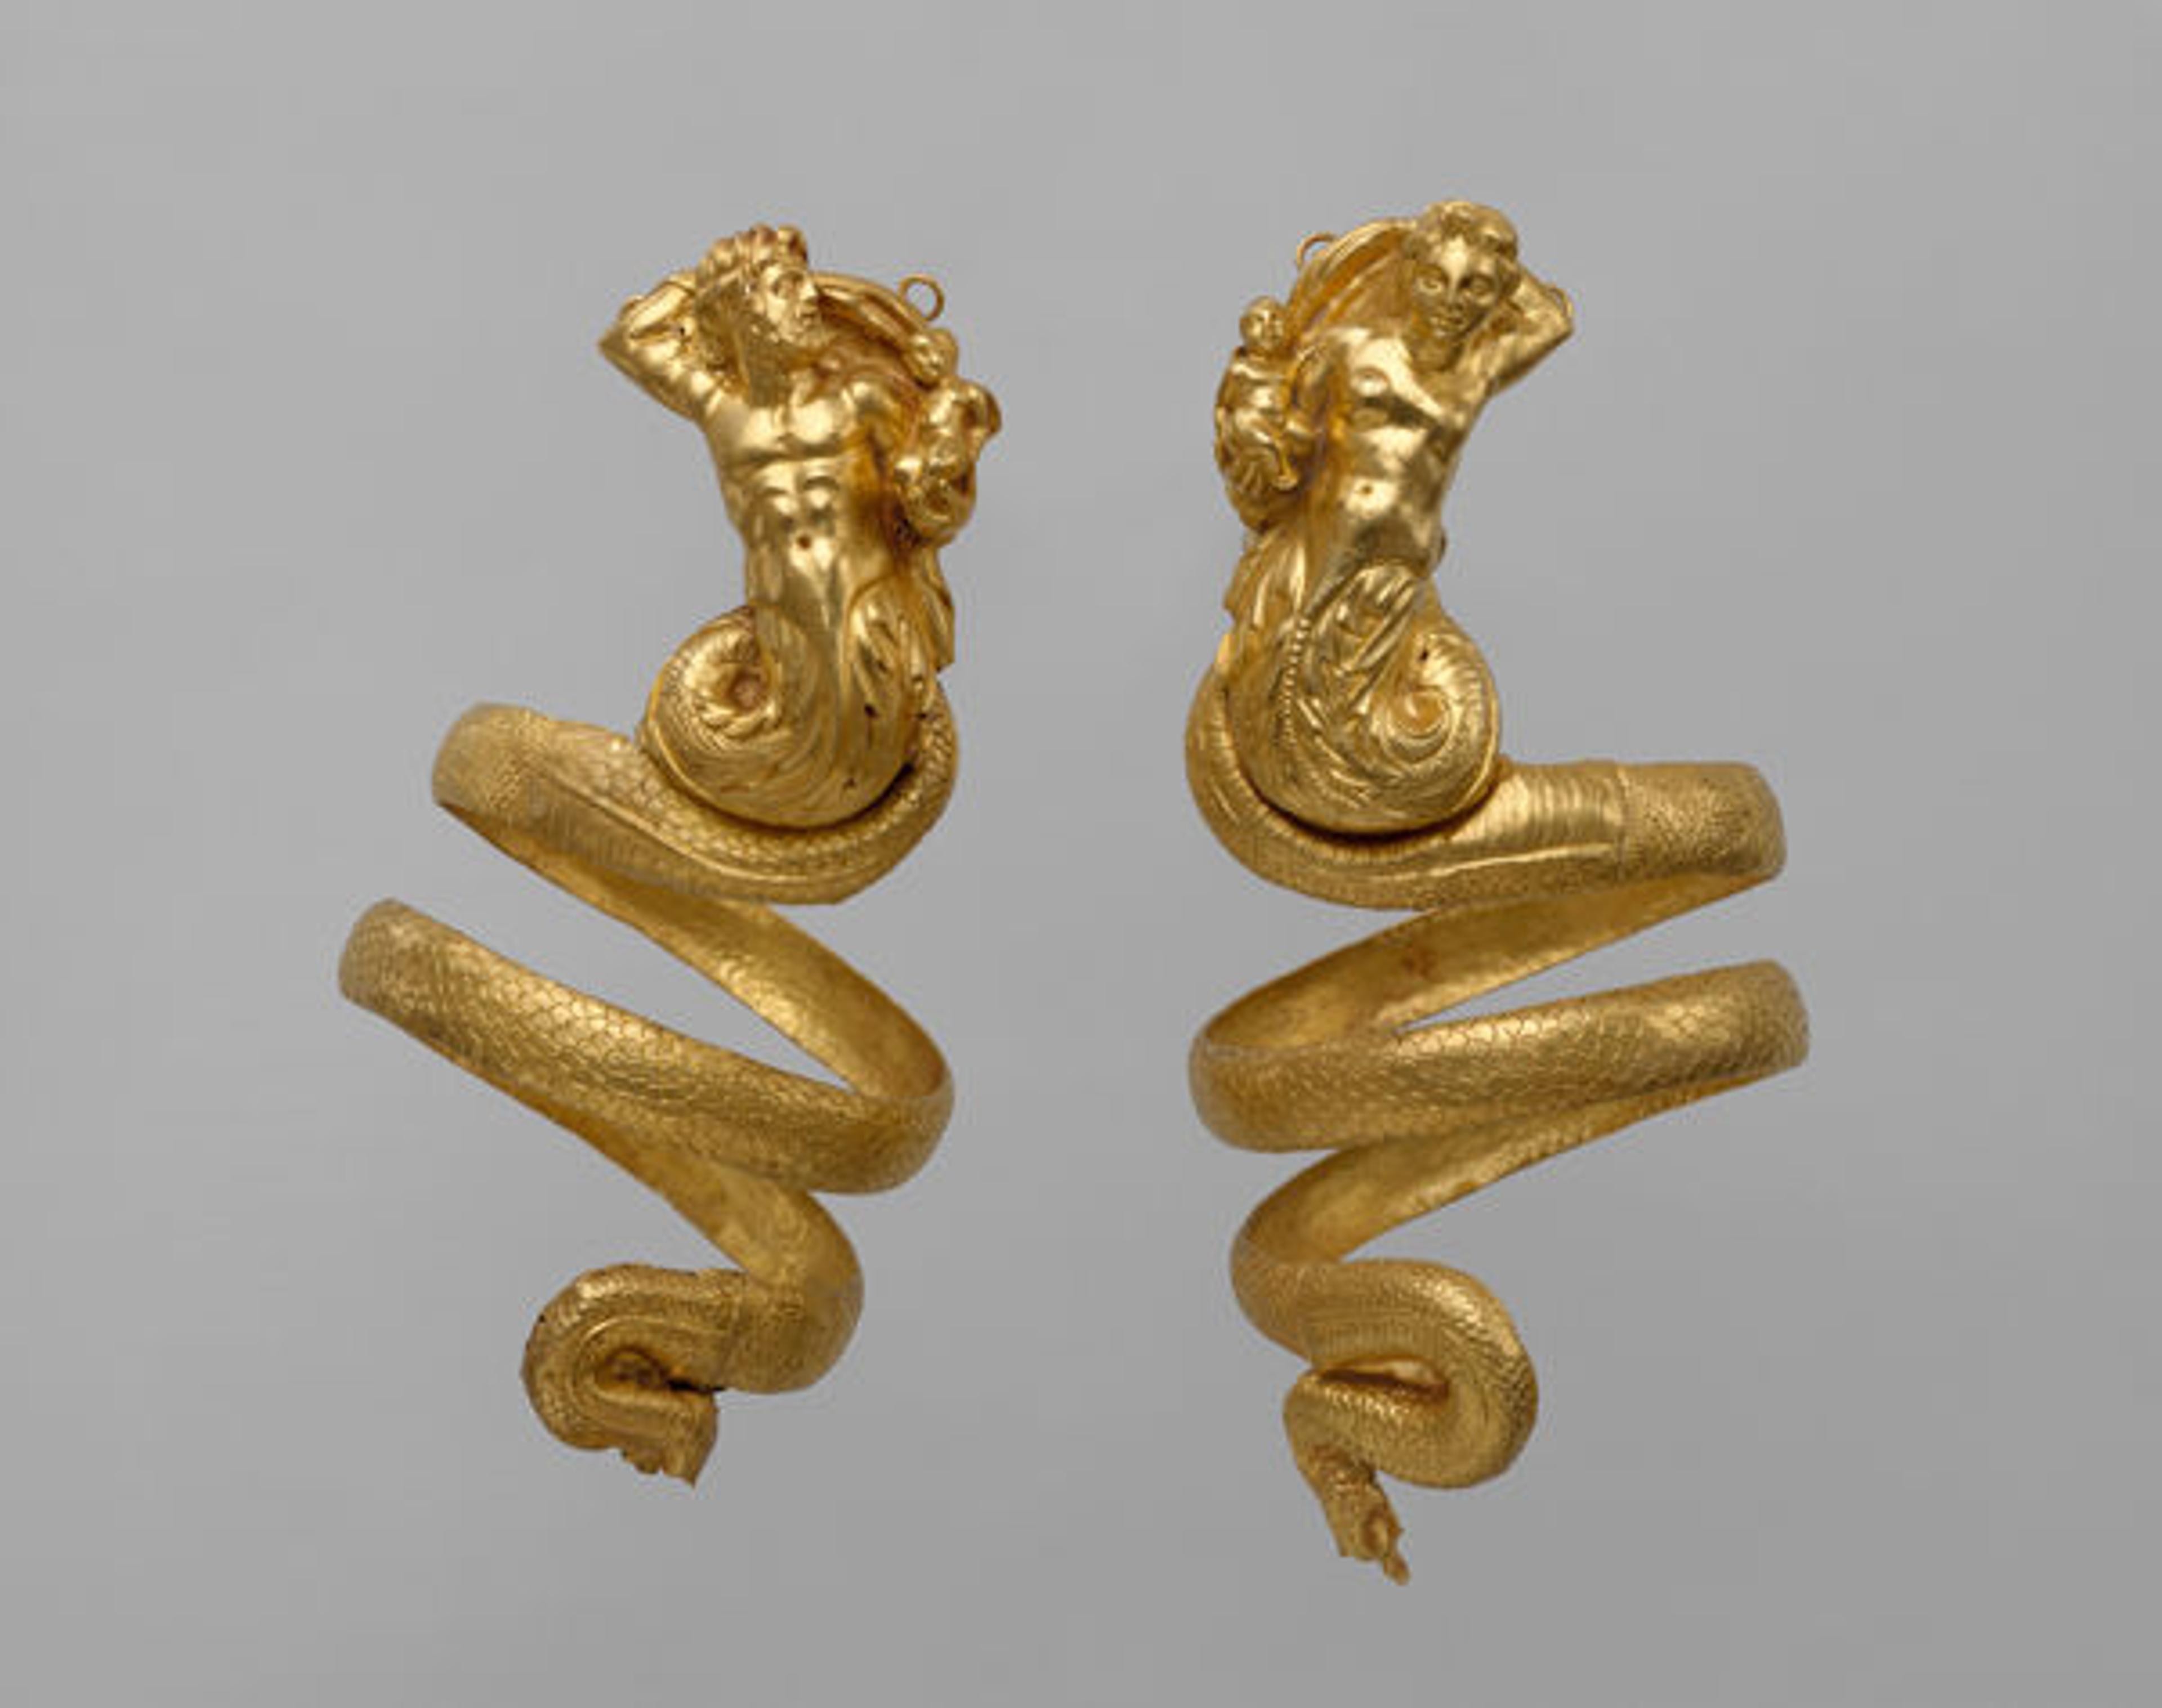 Pair of gold armbands, ca. 200 B.C. Greek, Hellenistic. Gold; Overall: 10 7/16in., 0.4lb. (26.5cm, 0.2kg) Other (height-triton armband): 9 13/16in. (25cm) Other (height-tritoness armband): 10 7/16in. (26.5cm). The Metropolitan Museum of Art, New York, Rogers Fund, 1956 (56.11.5, .6)